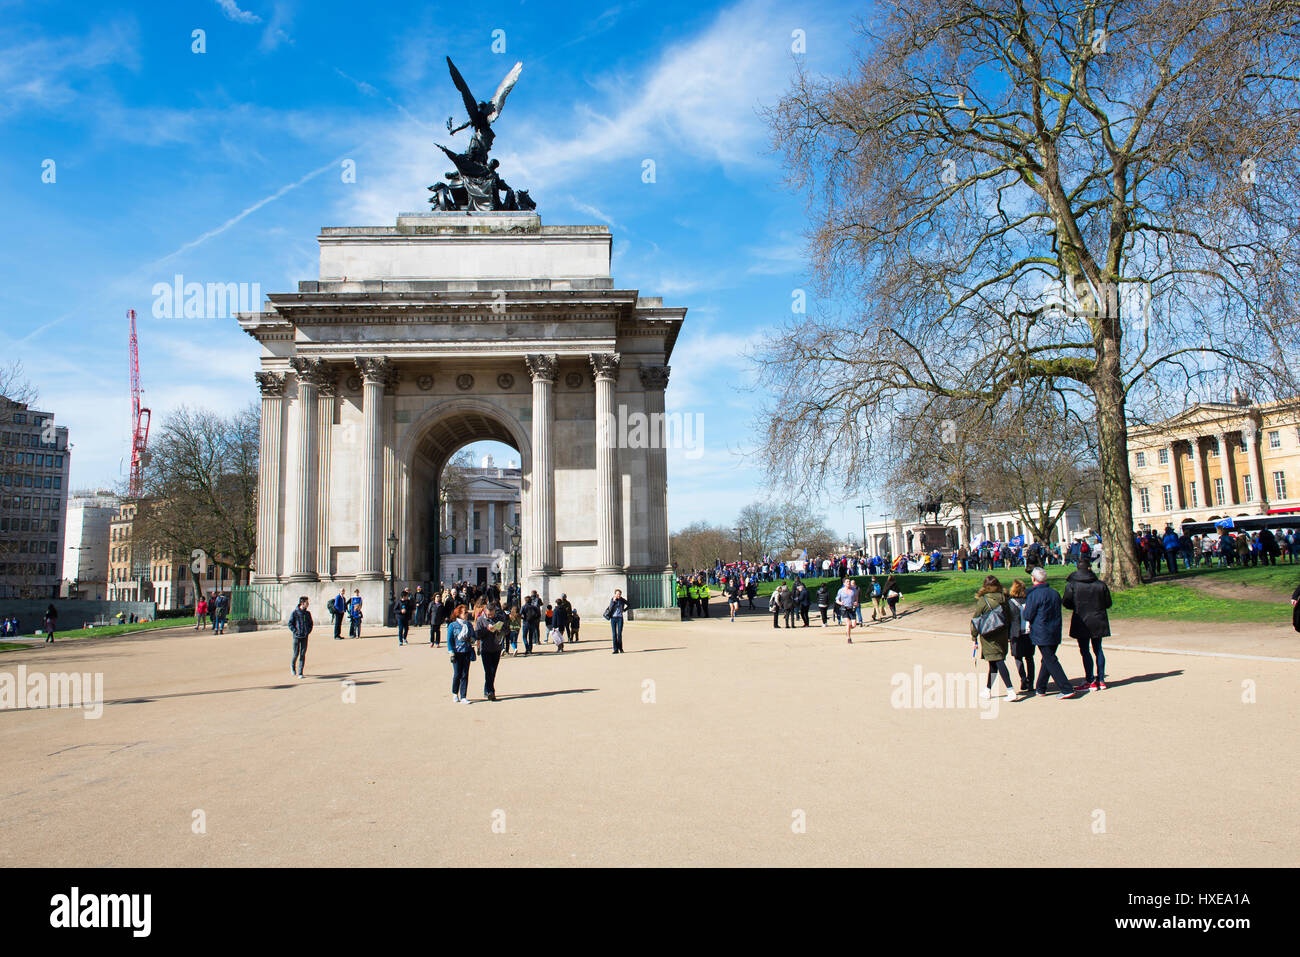 The Wellington Arch on a bright spring morning, London, England. Stock Photo